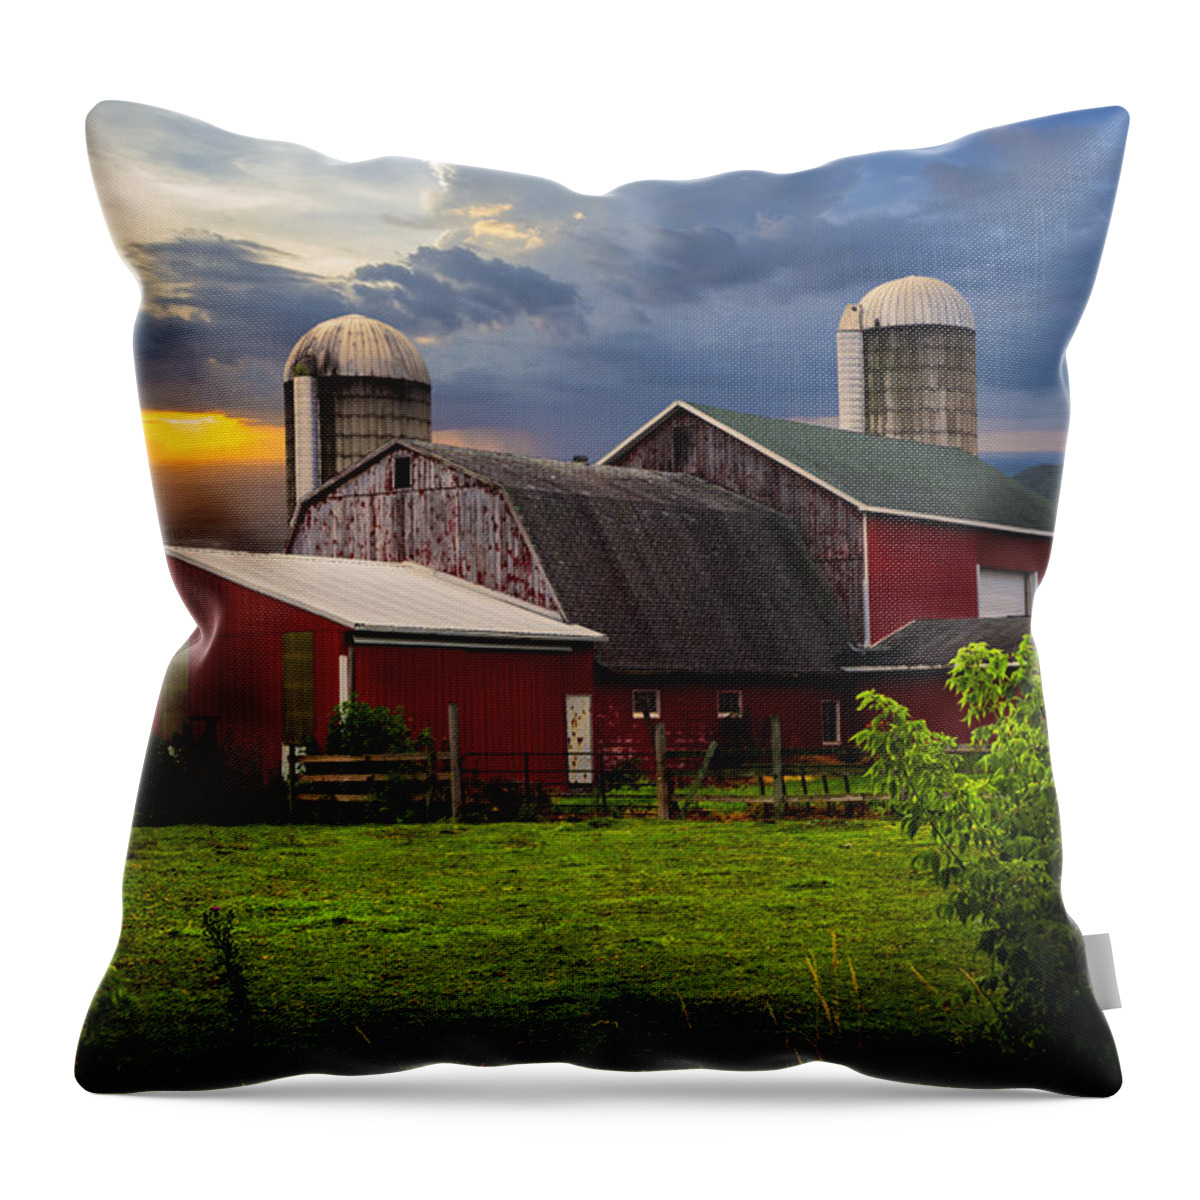 Appalachia Throw Pillow featuring the photograph Red Barns by Debra and Dave Vanderlaan